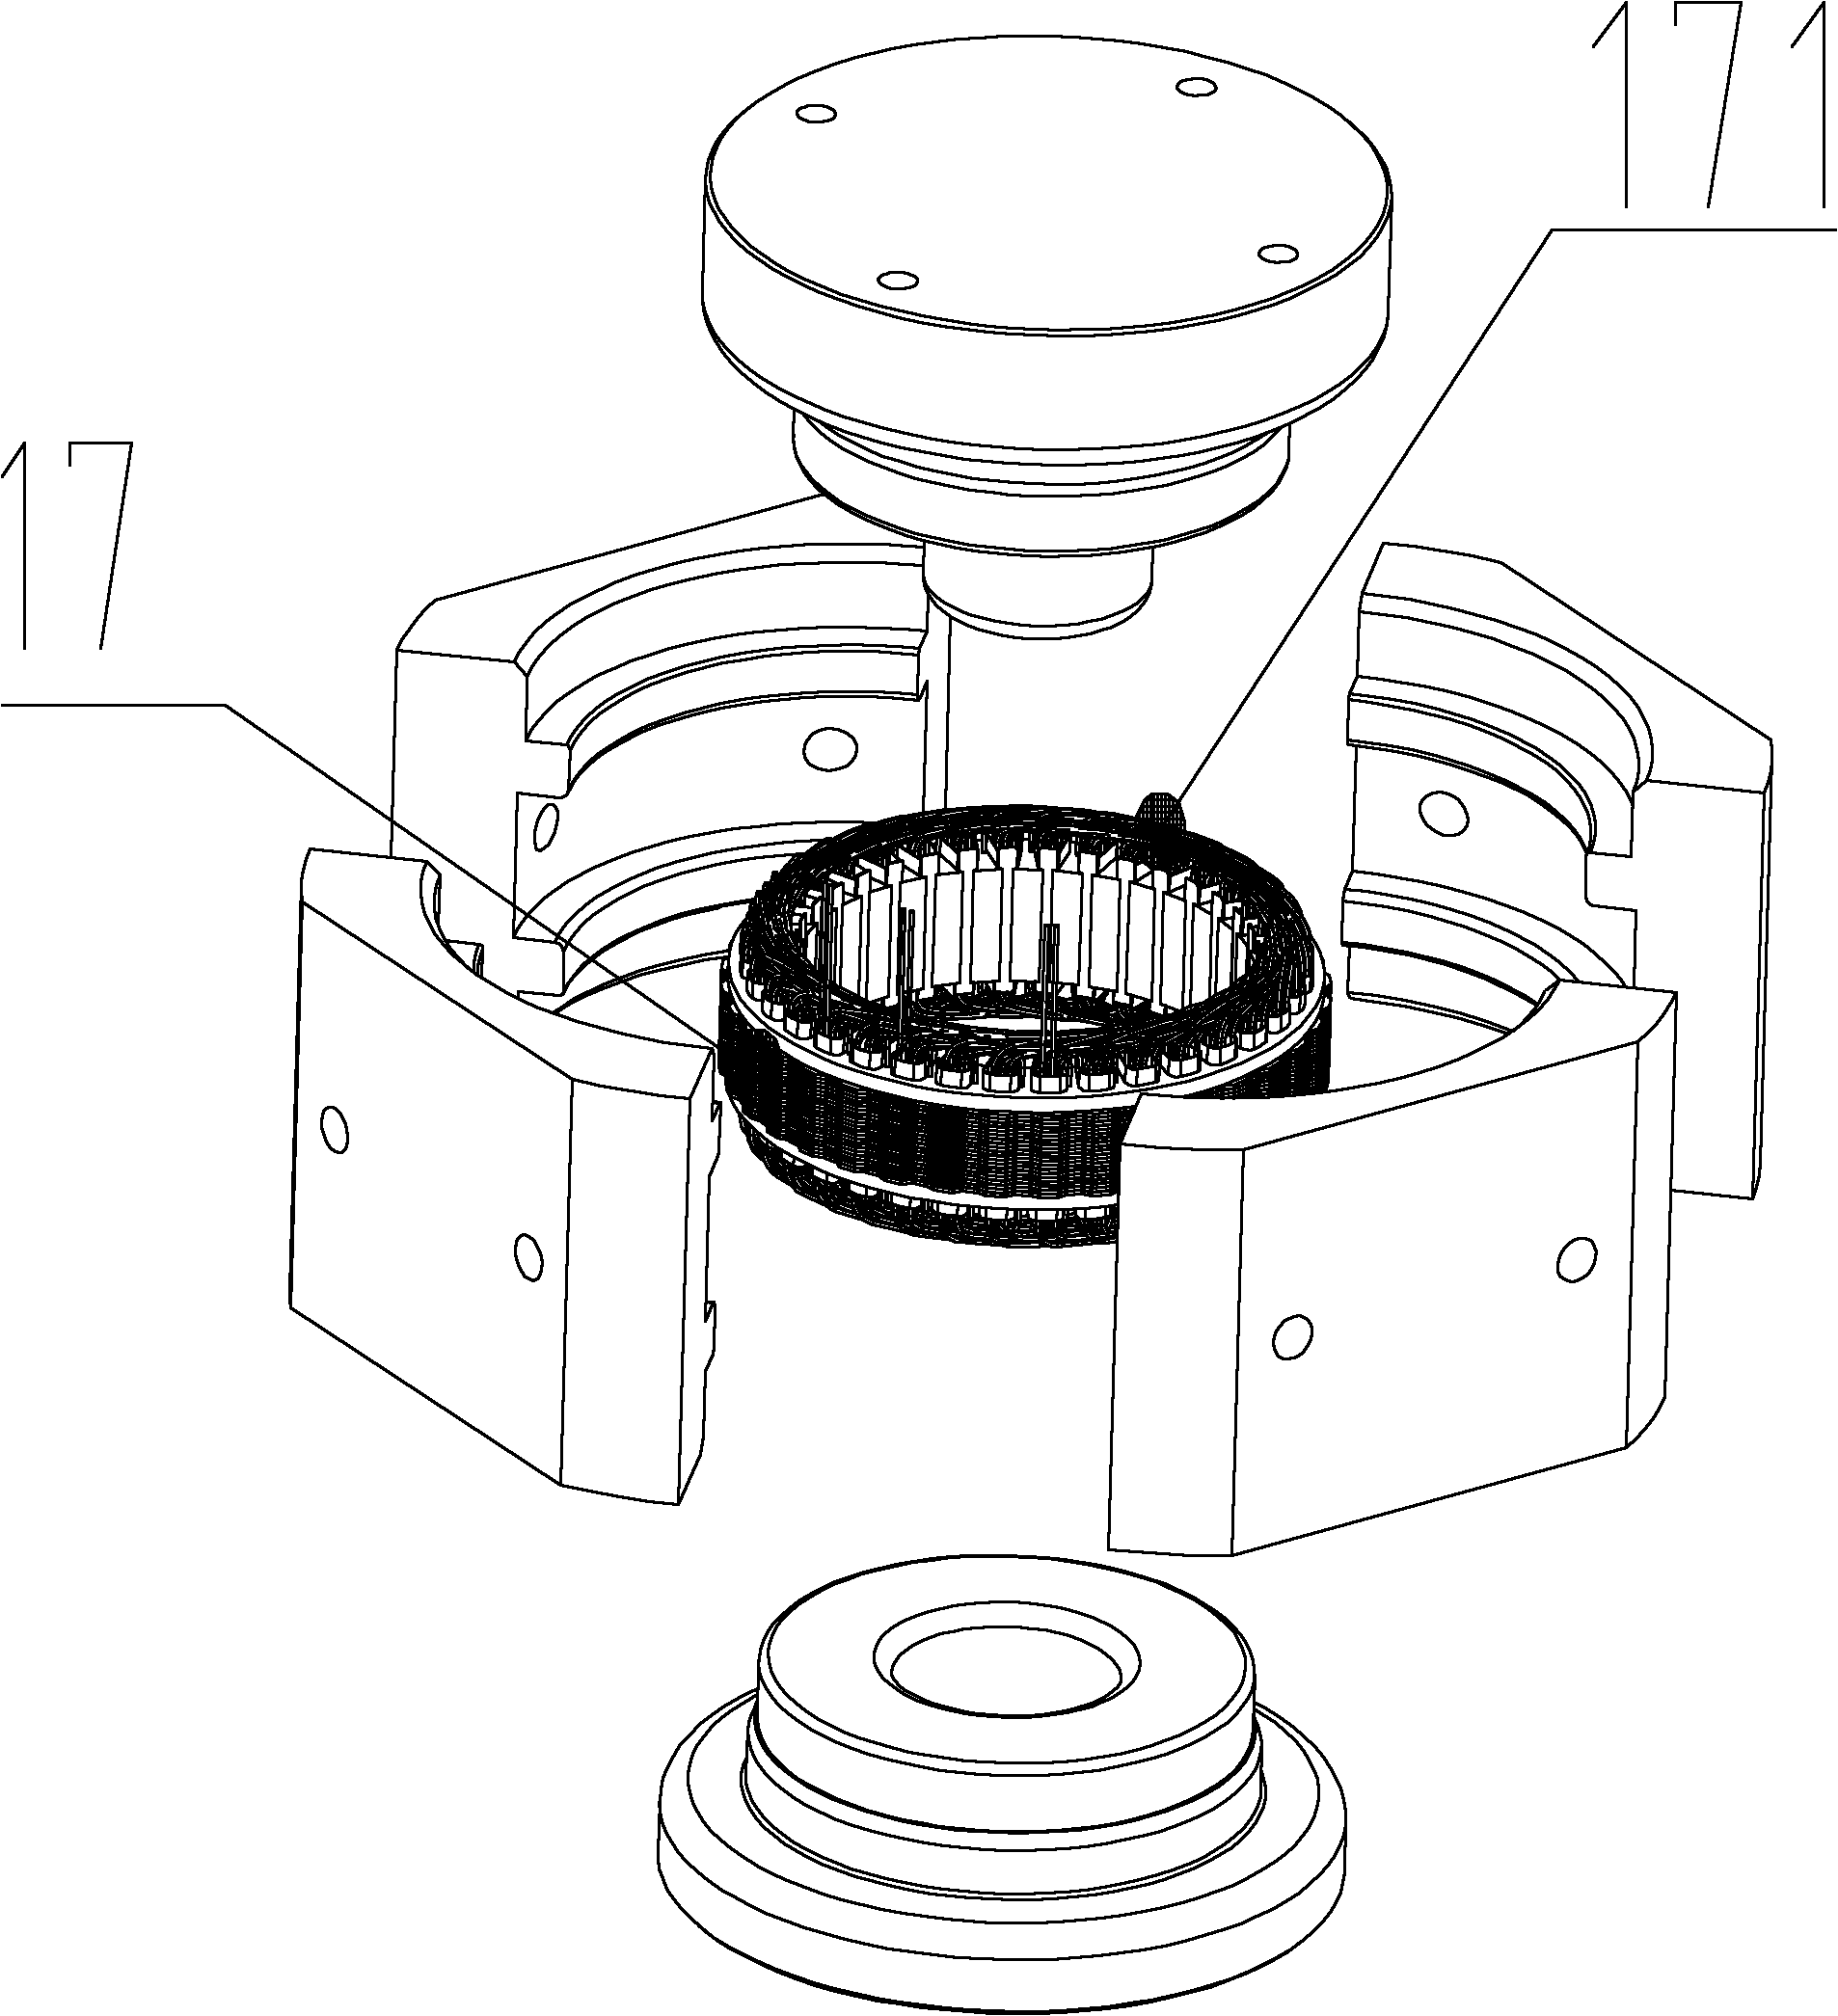 Motor stator coil reshaping method and device